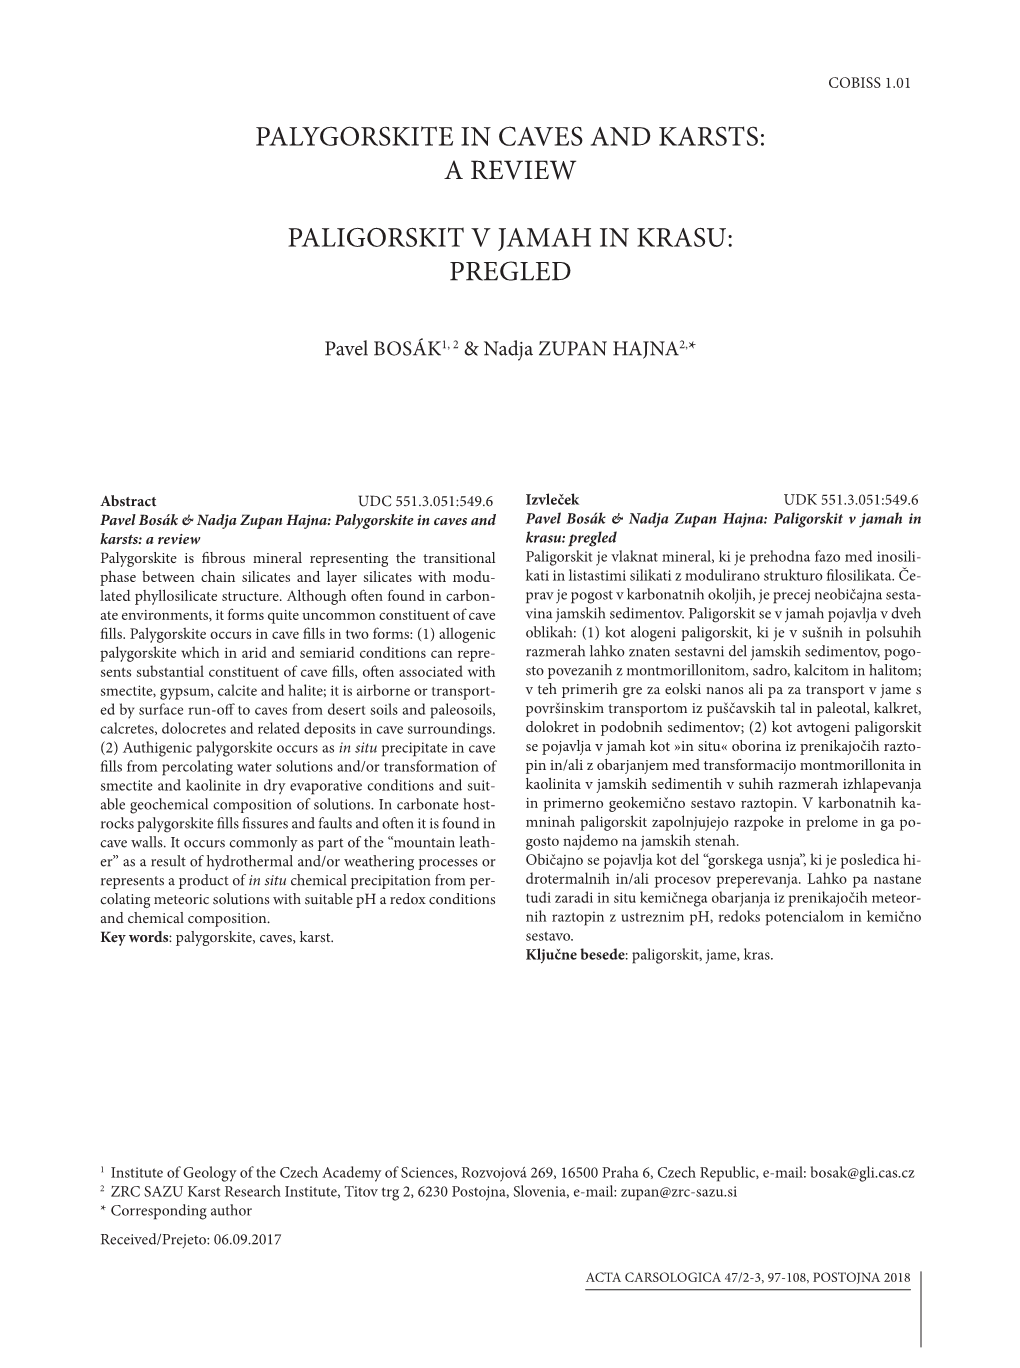 Palygorskite in Caves and Karsts: a Review